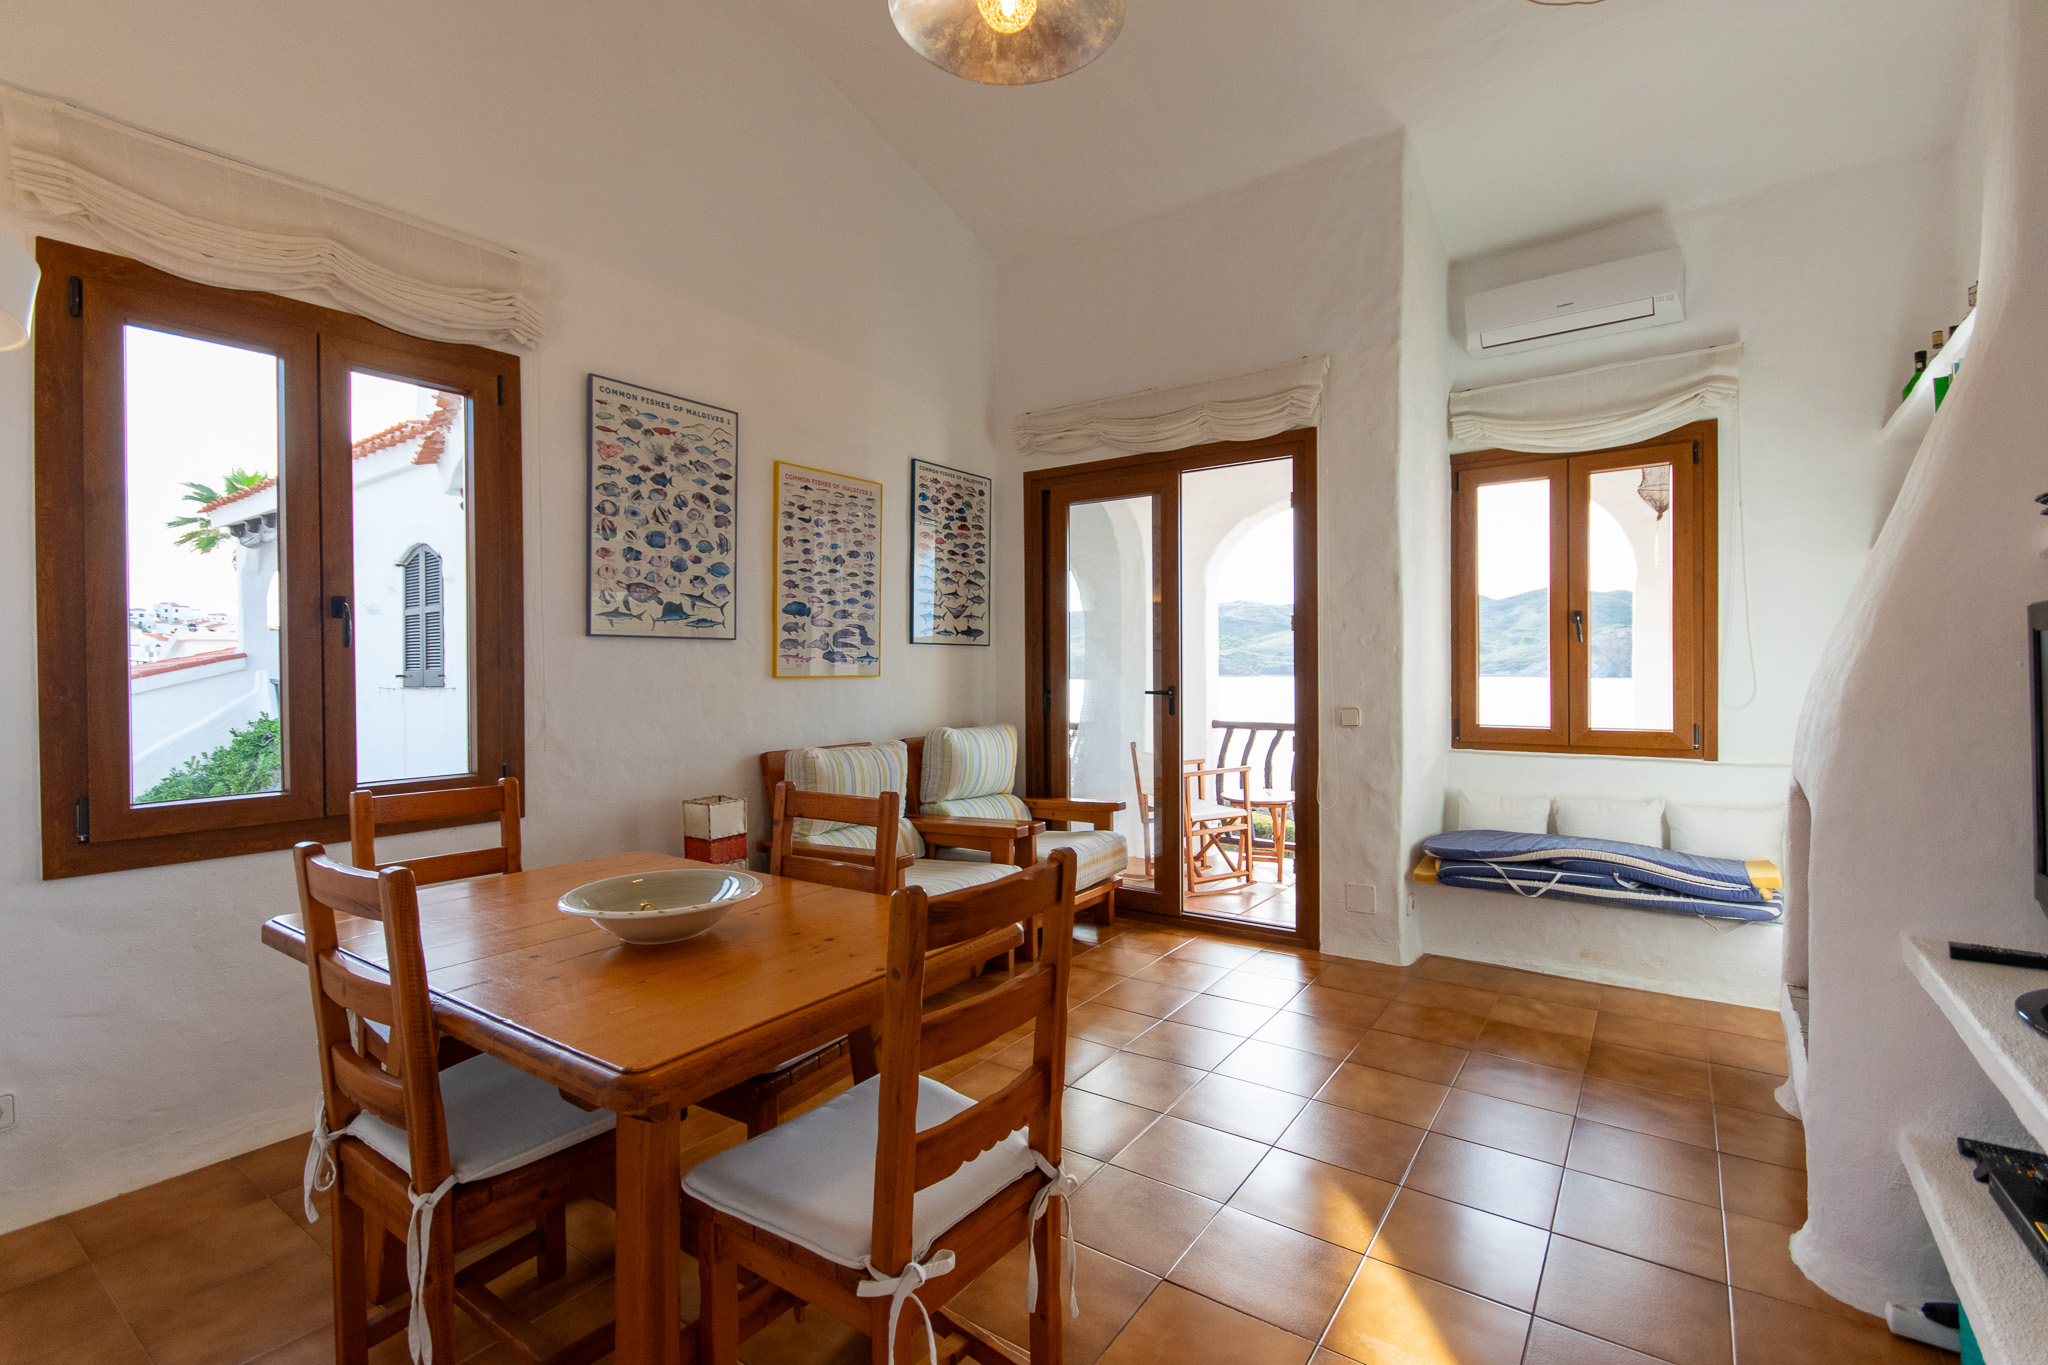 Living-dining room of a frontline apartment in Playas de Fornells.